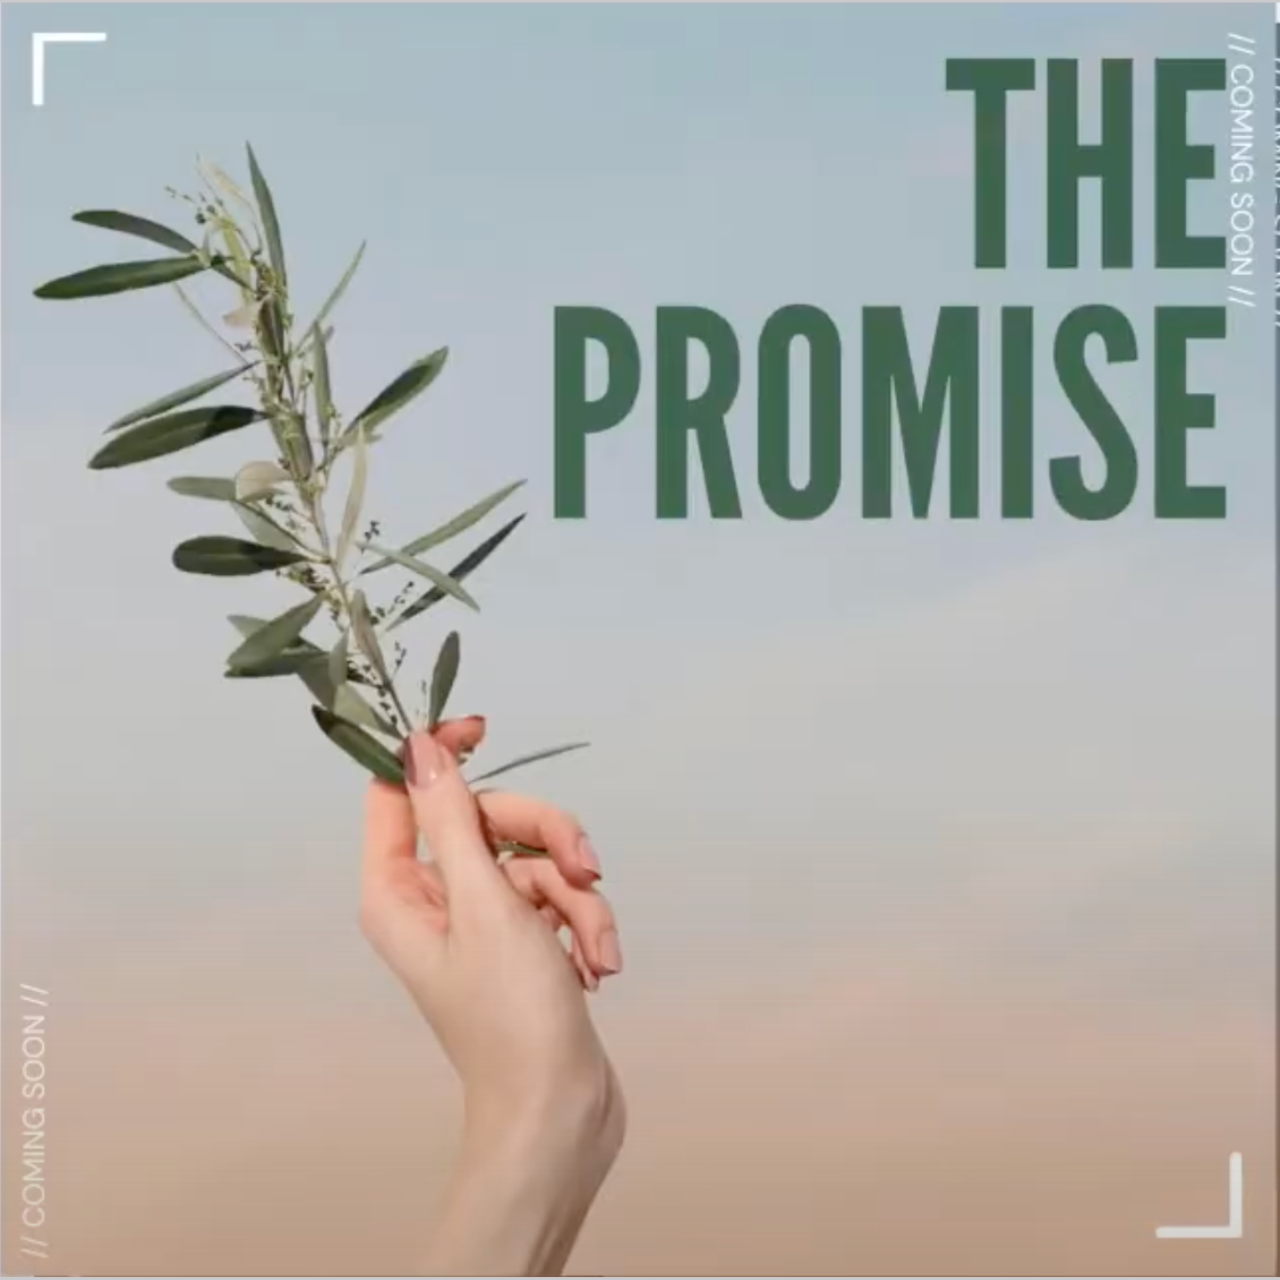 The Promise (CD)